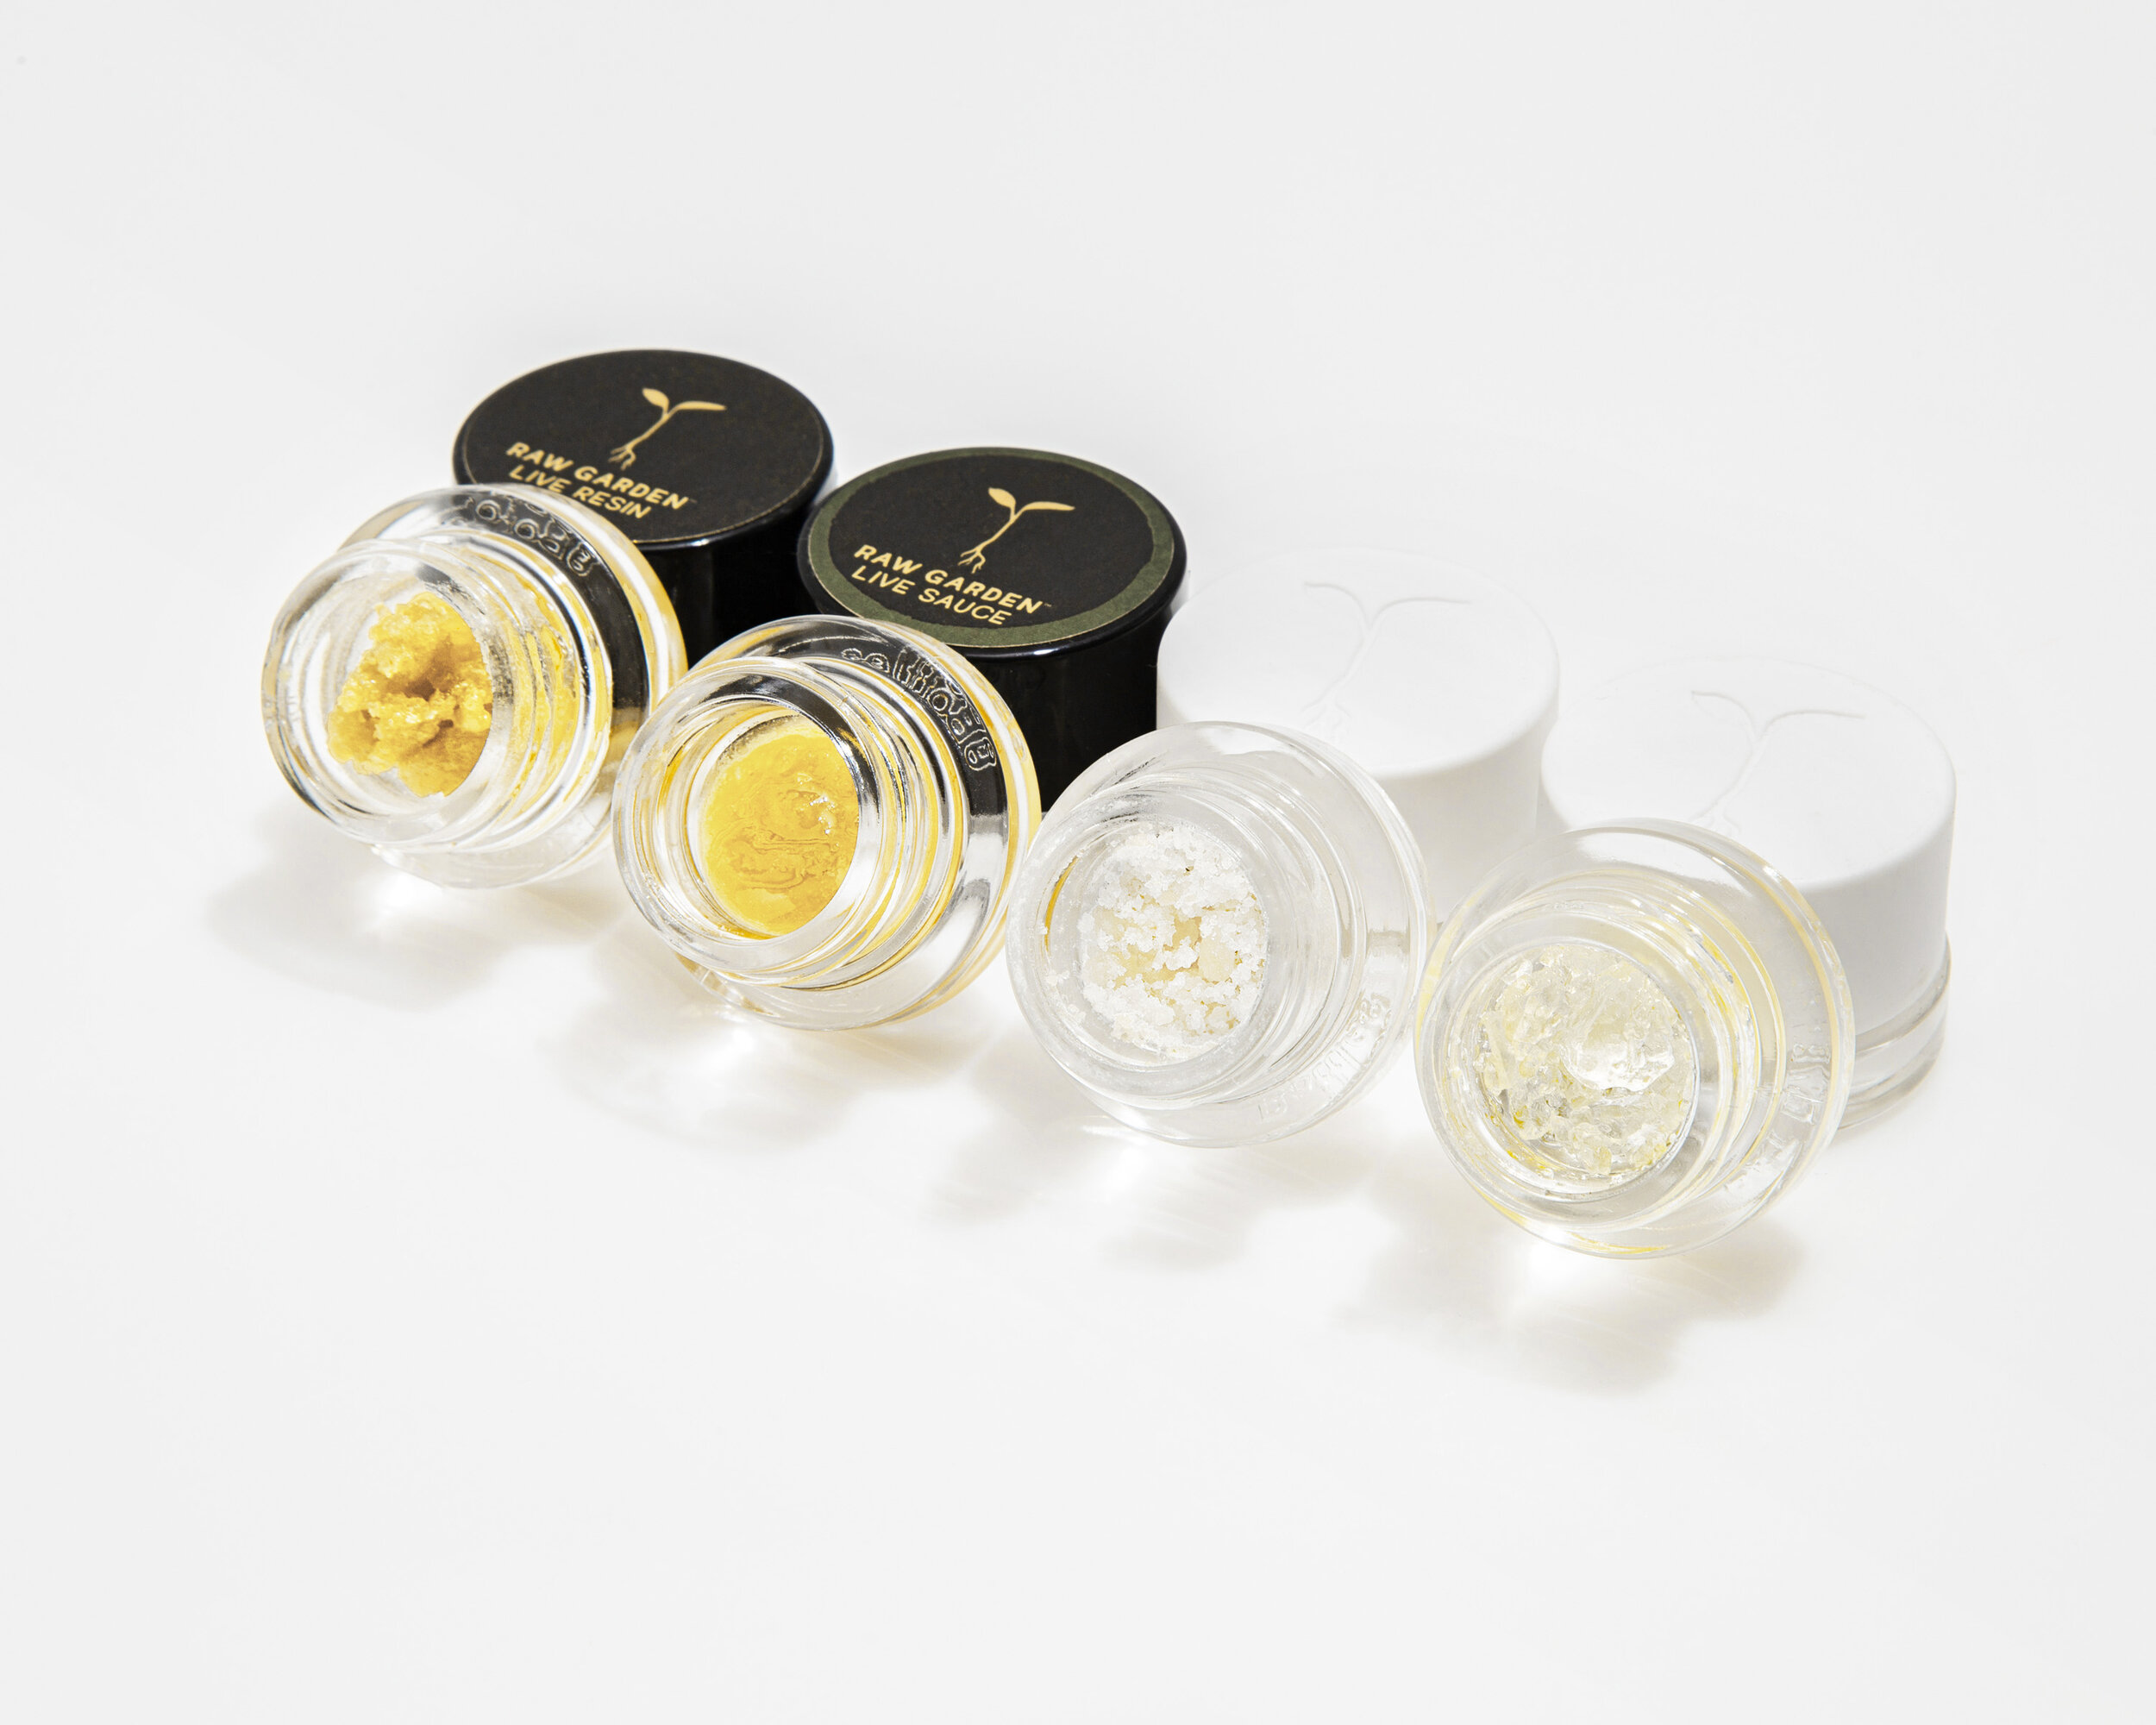 Raw Garden's Family of Concentrates